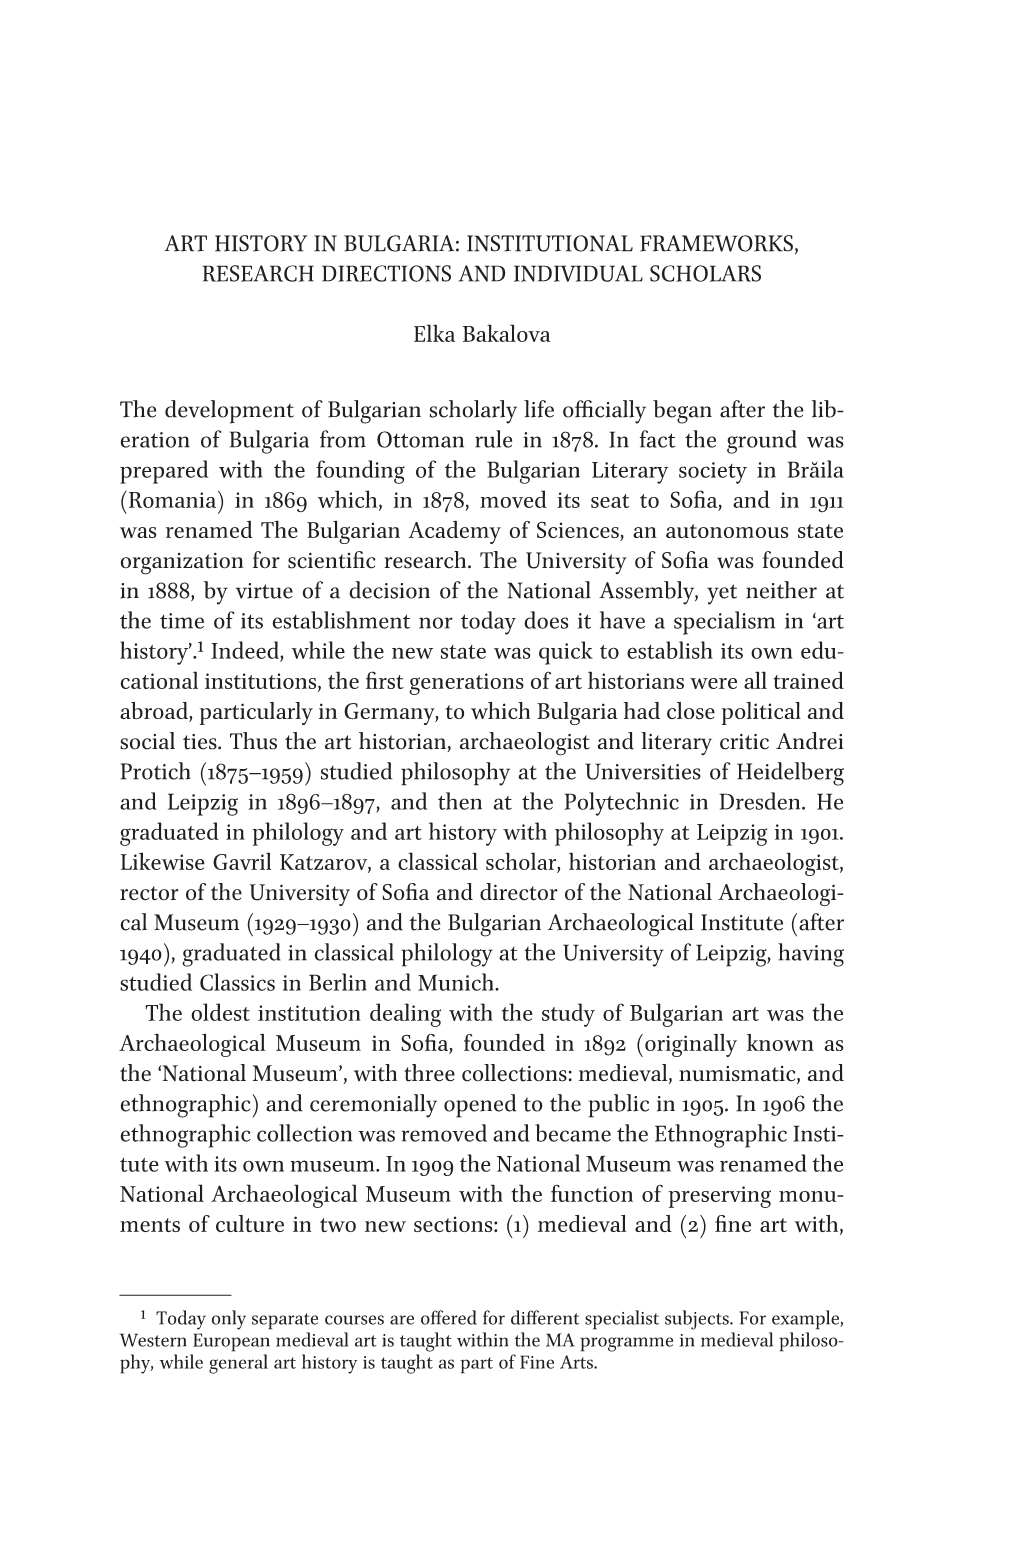 Art History in Bulgaria: Institutional Frameworks, Research Directions and Individual Scholars